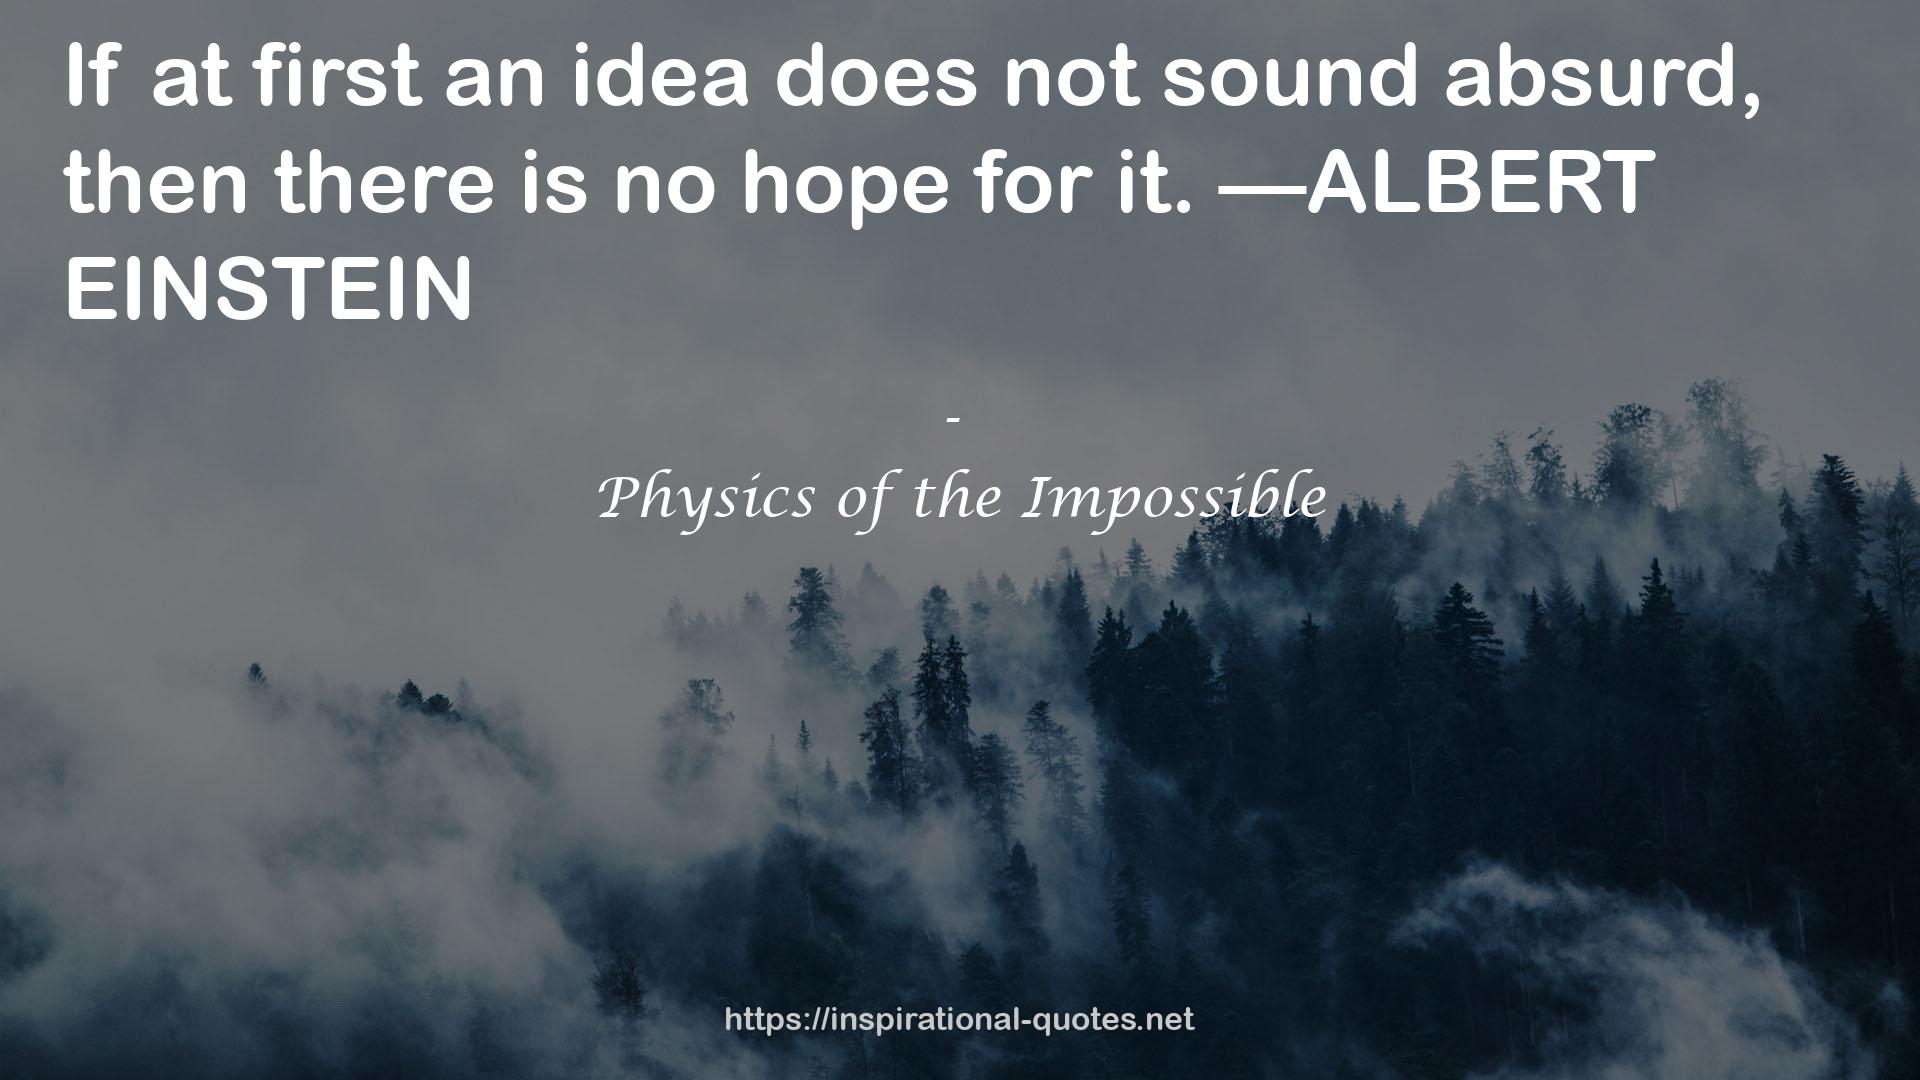 Physics of the Impossible QUOTES